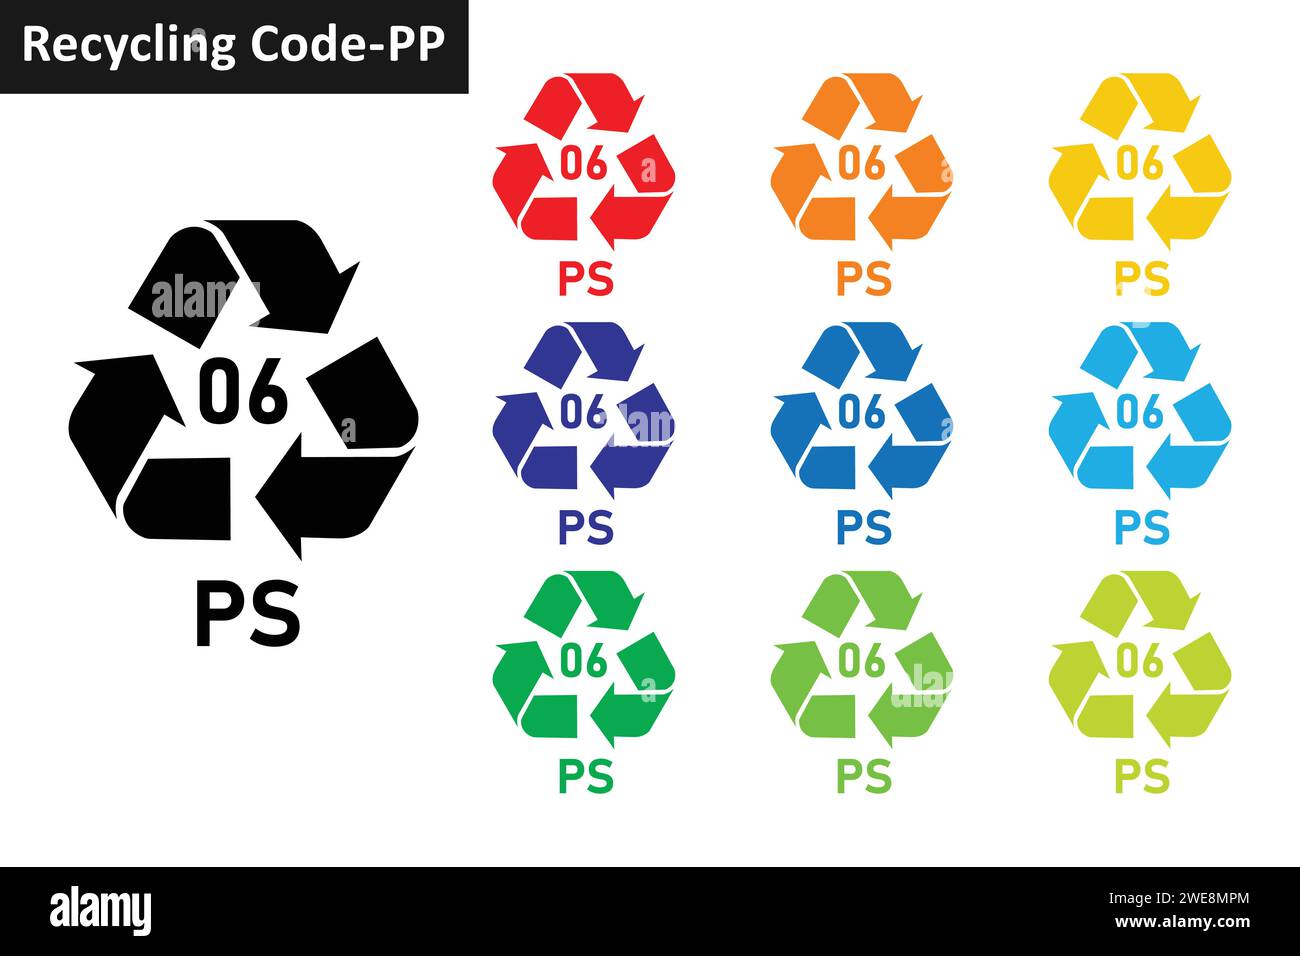 PS plastic recycling code icon set. Mobius Strip Plastic recycling symbol 06 PS. Plastic recycling code 06 icon collection in ten colors. Stock Vector